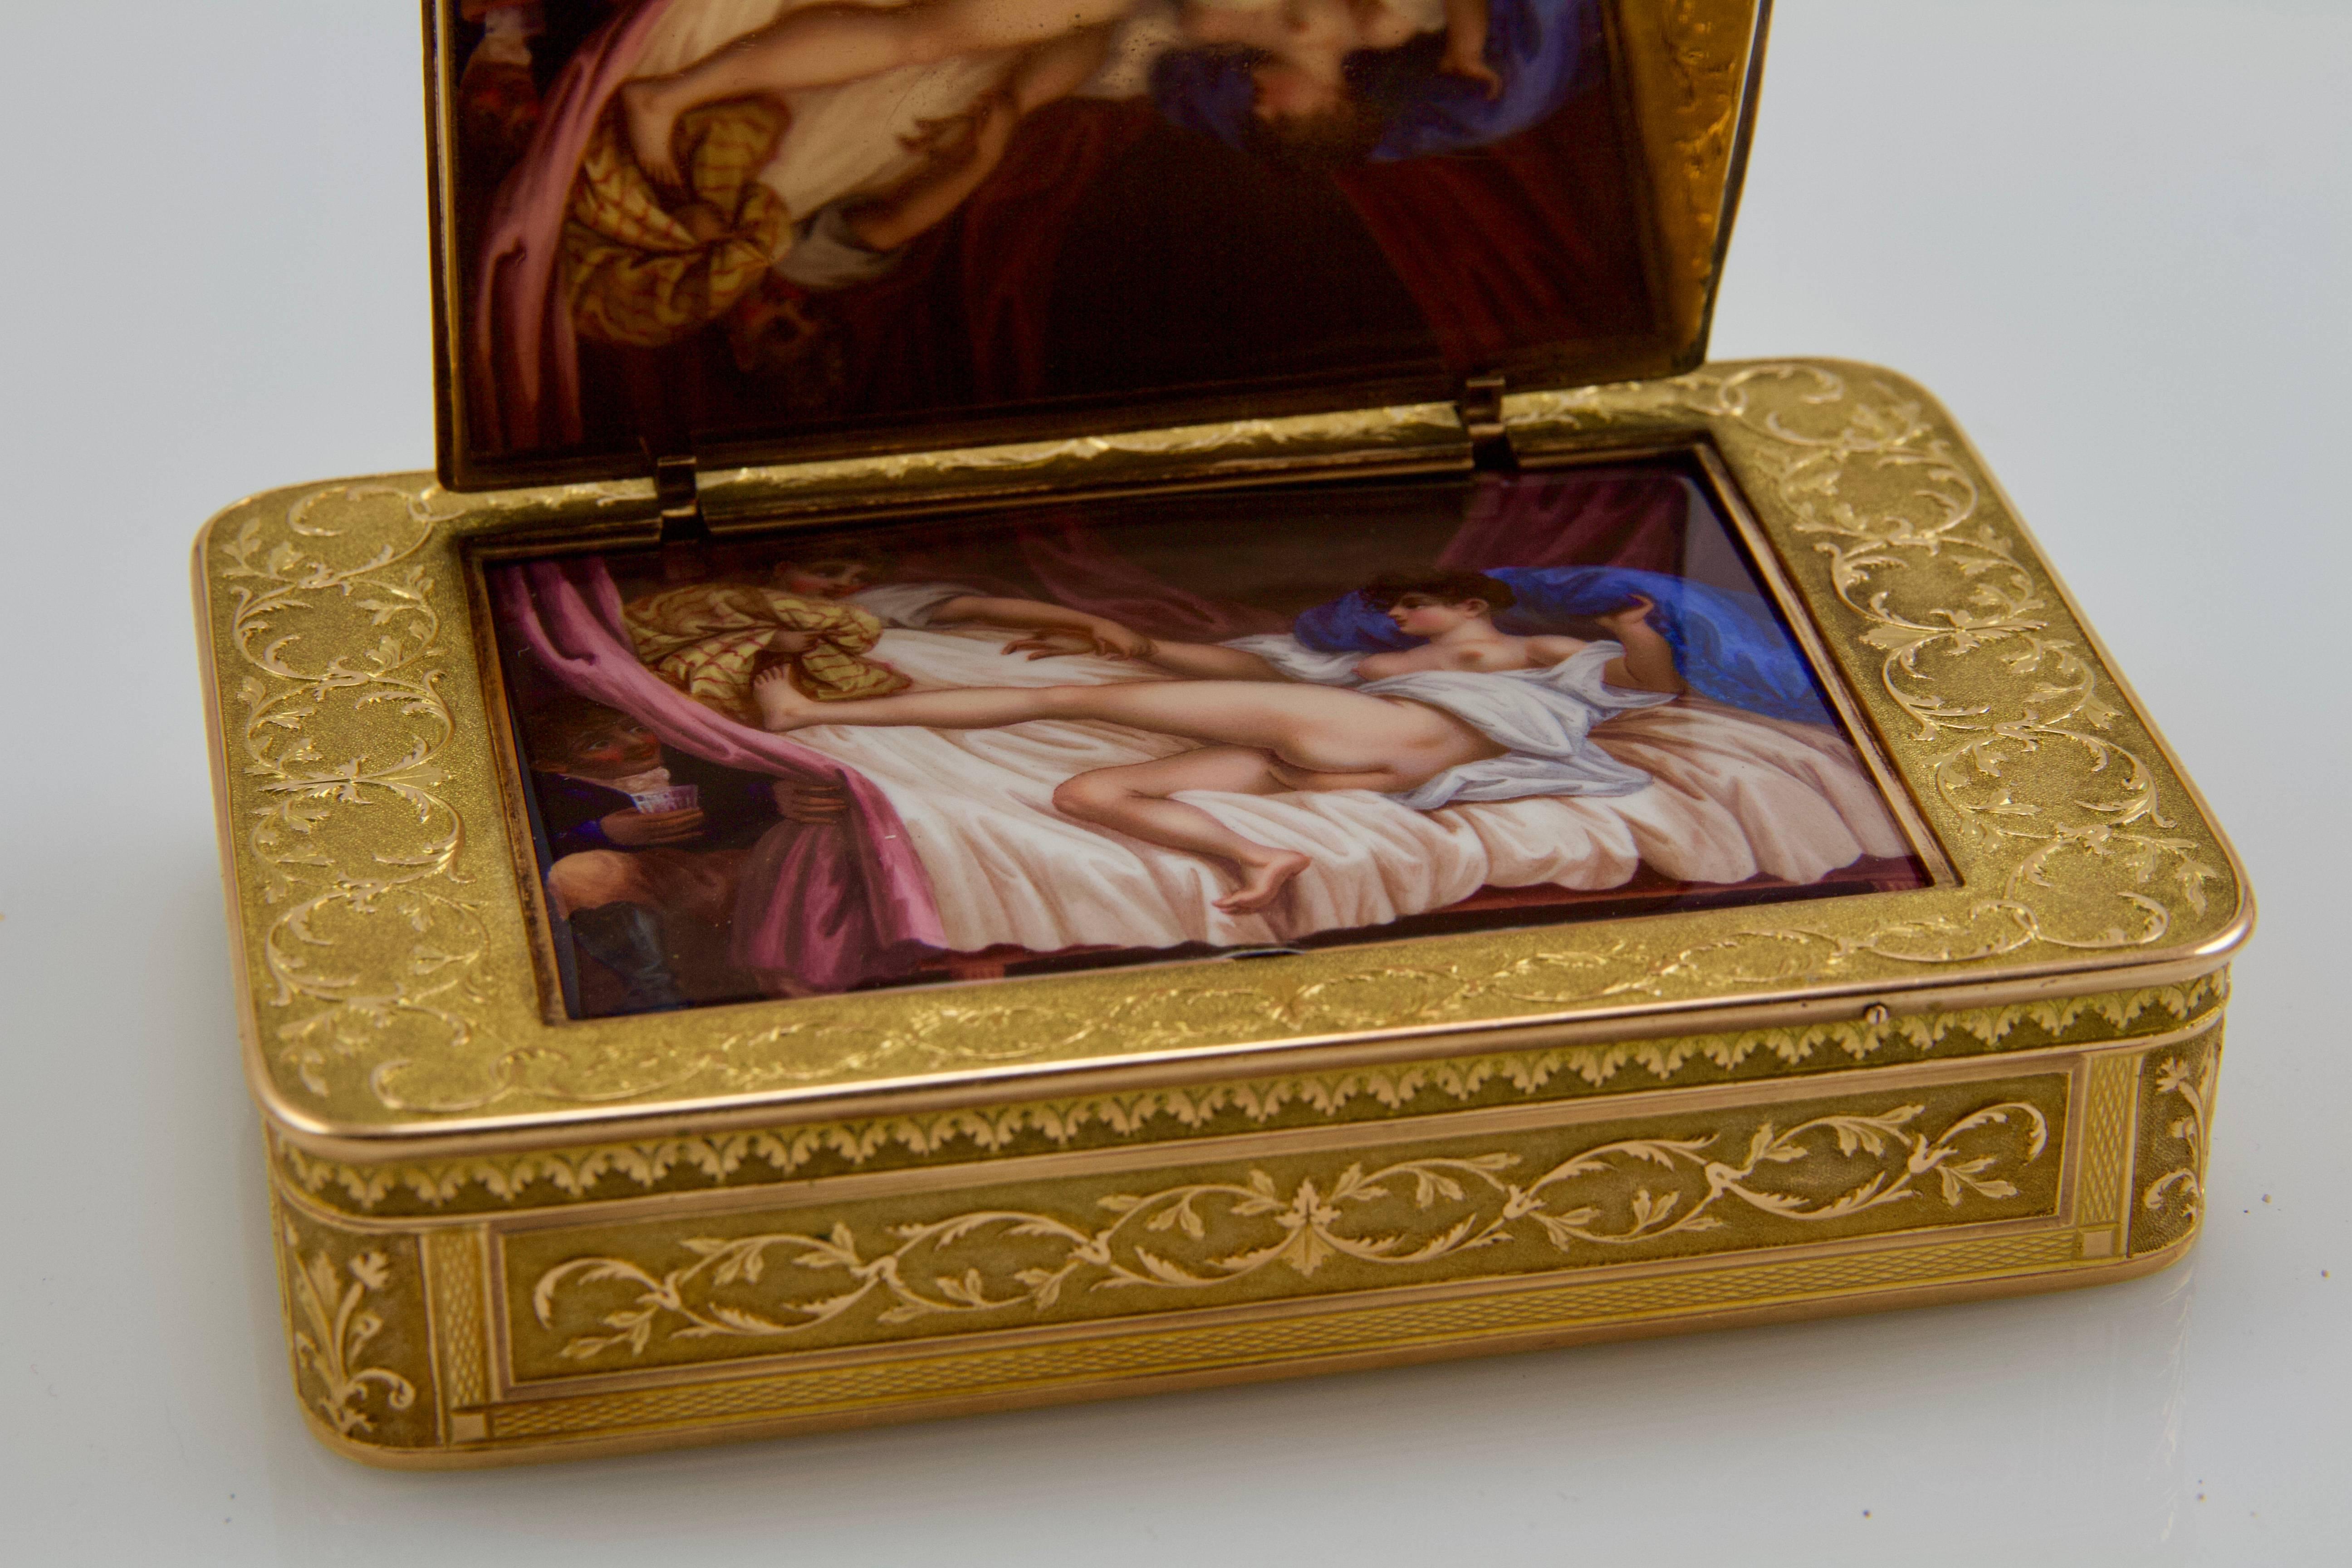 Double opening rectangulaire two colors gold snuffbox. All sides with broad matt borders relieved by a continuous raised burnished rosace pattern. Presenting on the lid an engraving scene representing an allegory of the time dissimulating a secret